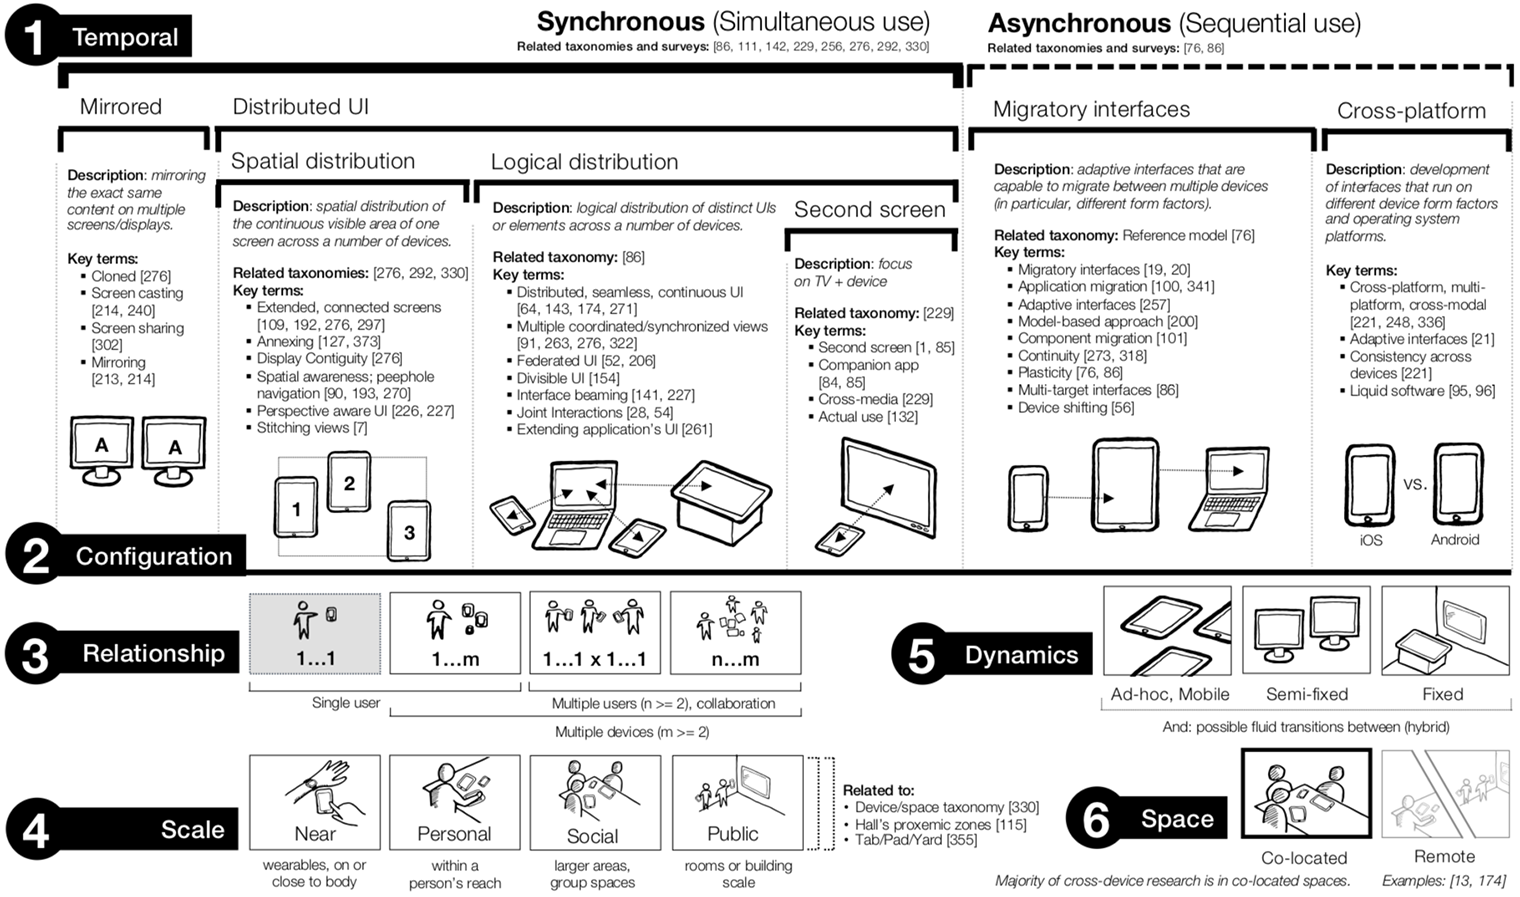 Cross-Device Survey: Taxonomy of cross-device design space dimensions: temporal, configuration, relationship, scale, dynamics and space